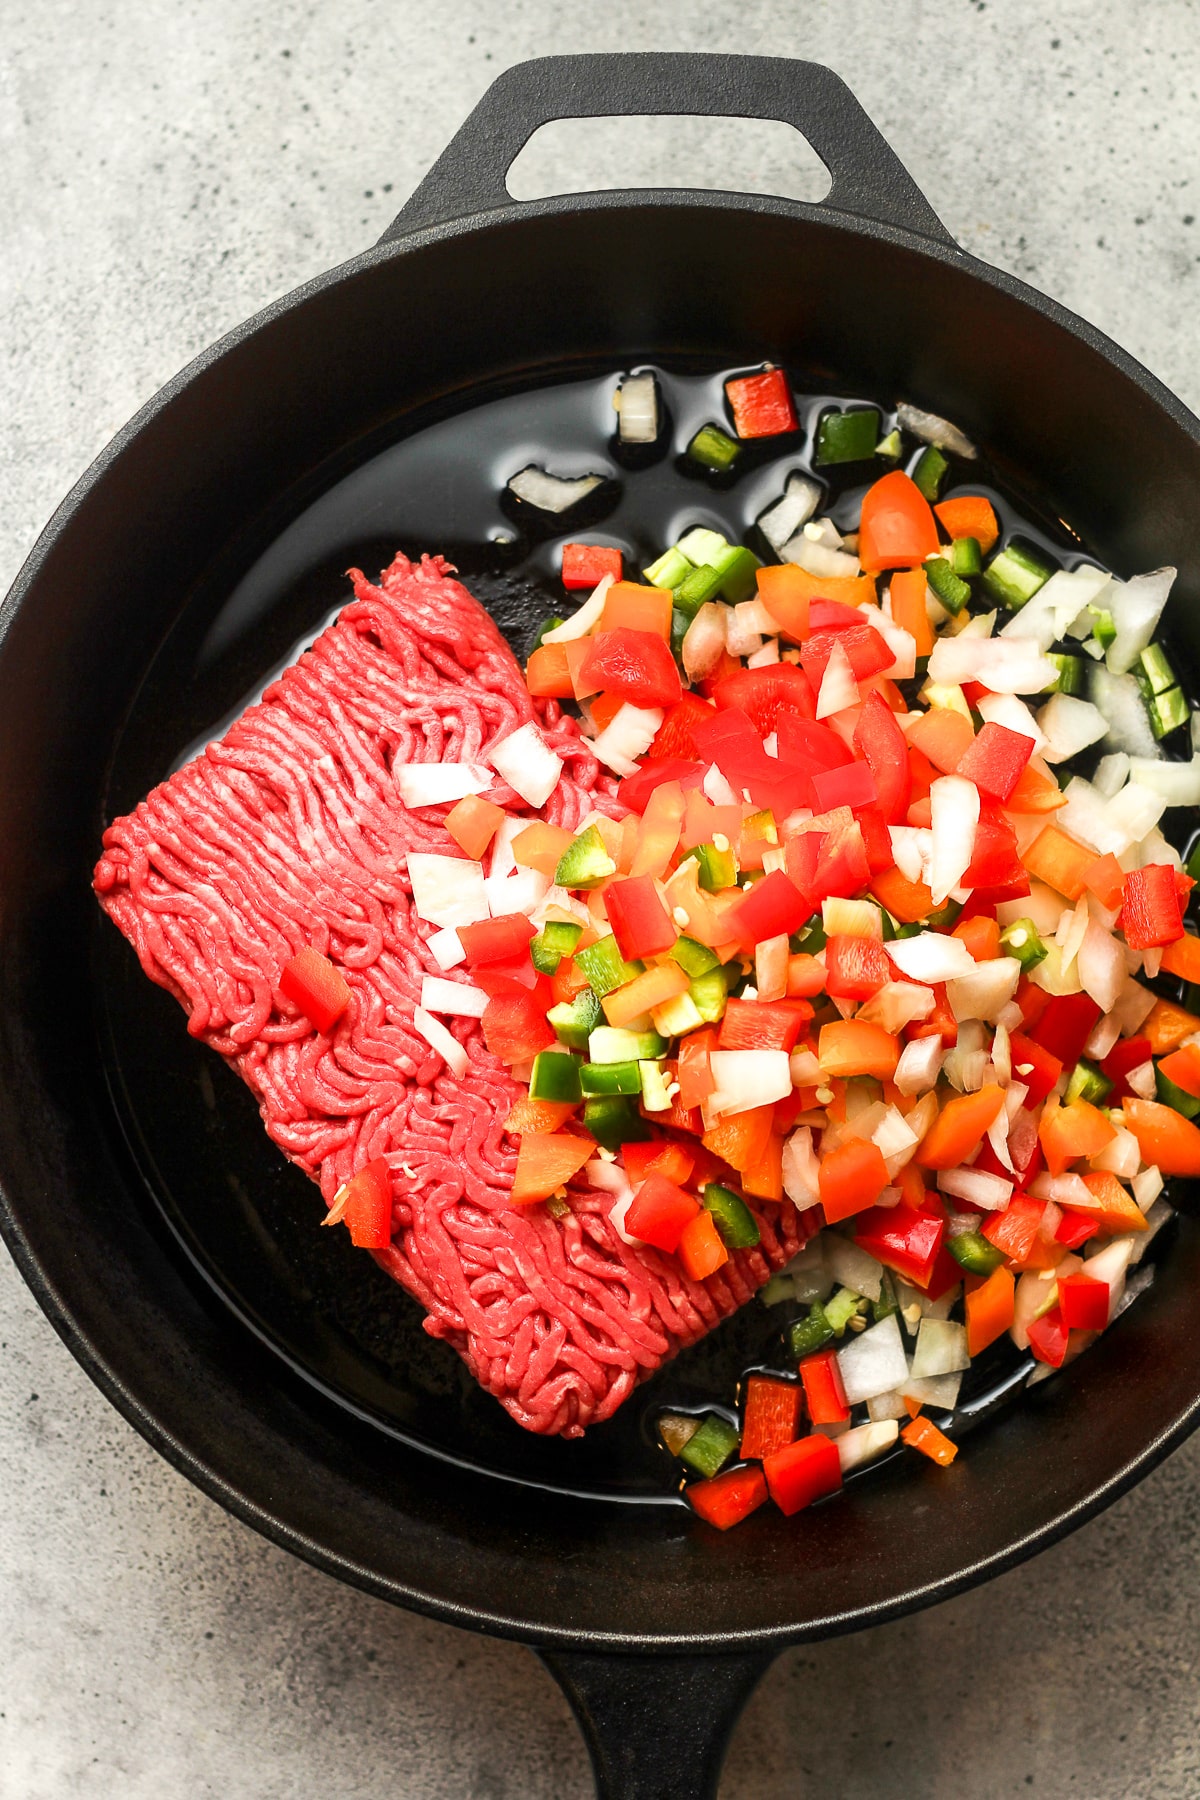 A skillet of diced veggies and ground beef.